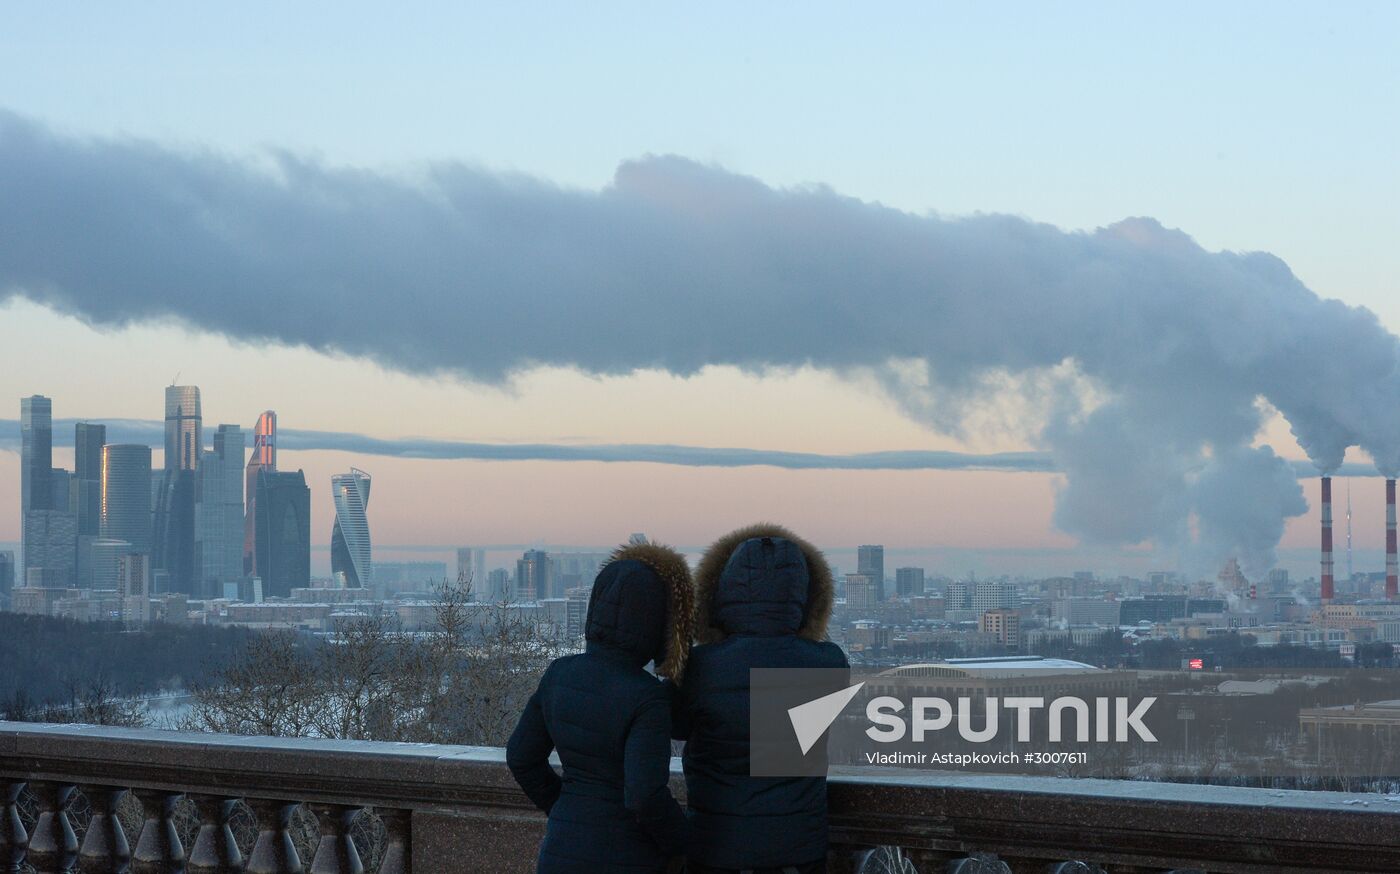 Freezing temperatures in Moscow